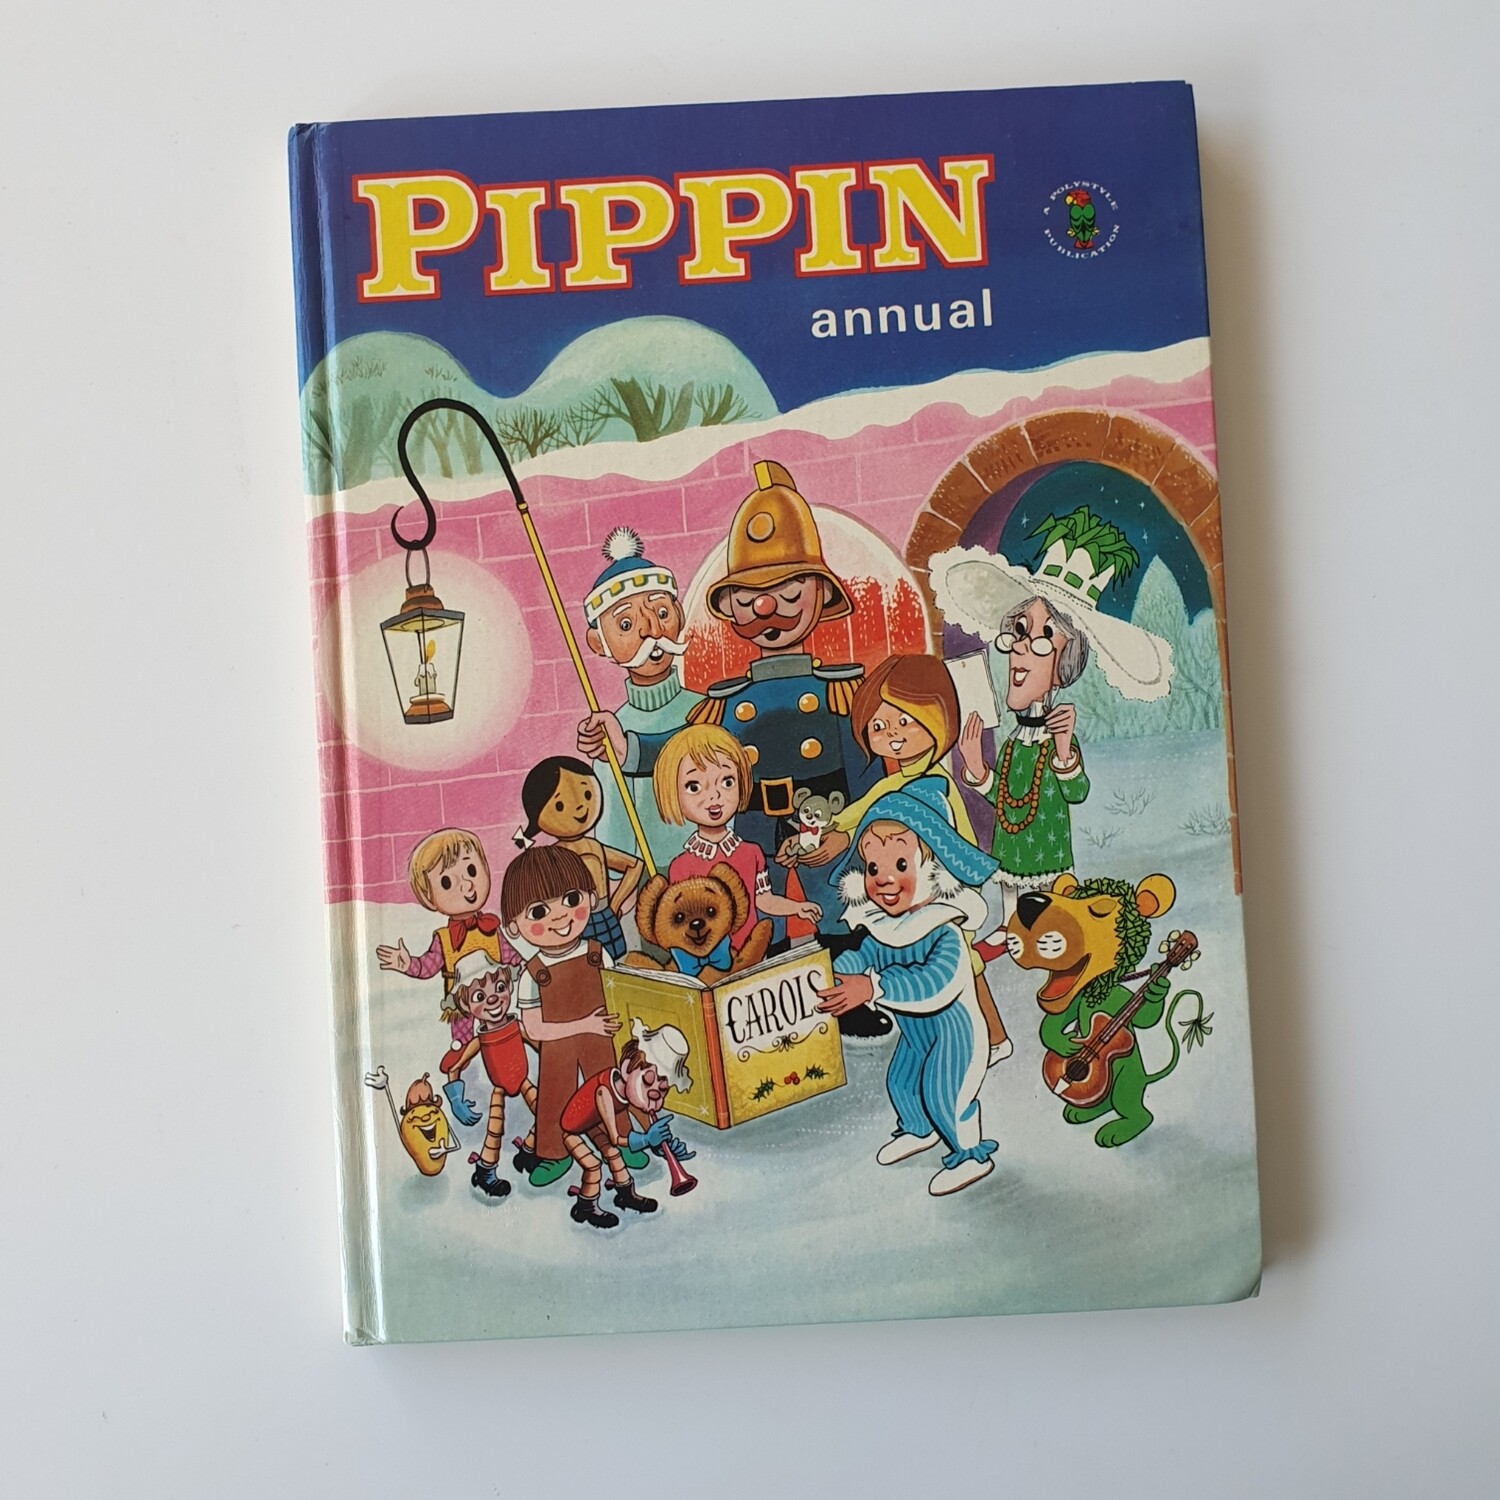 Pippin 1972, Trumpton, Andy Pandy, The Herbs, The Woodentops